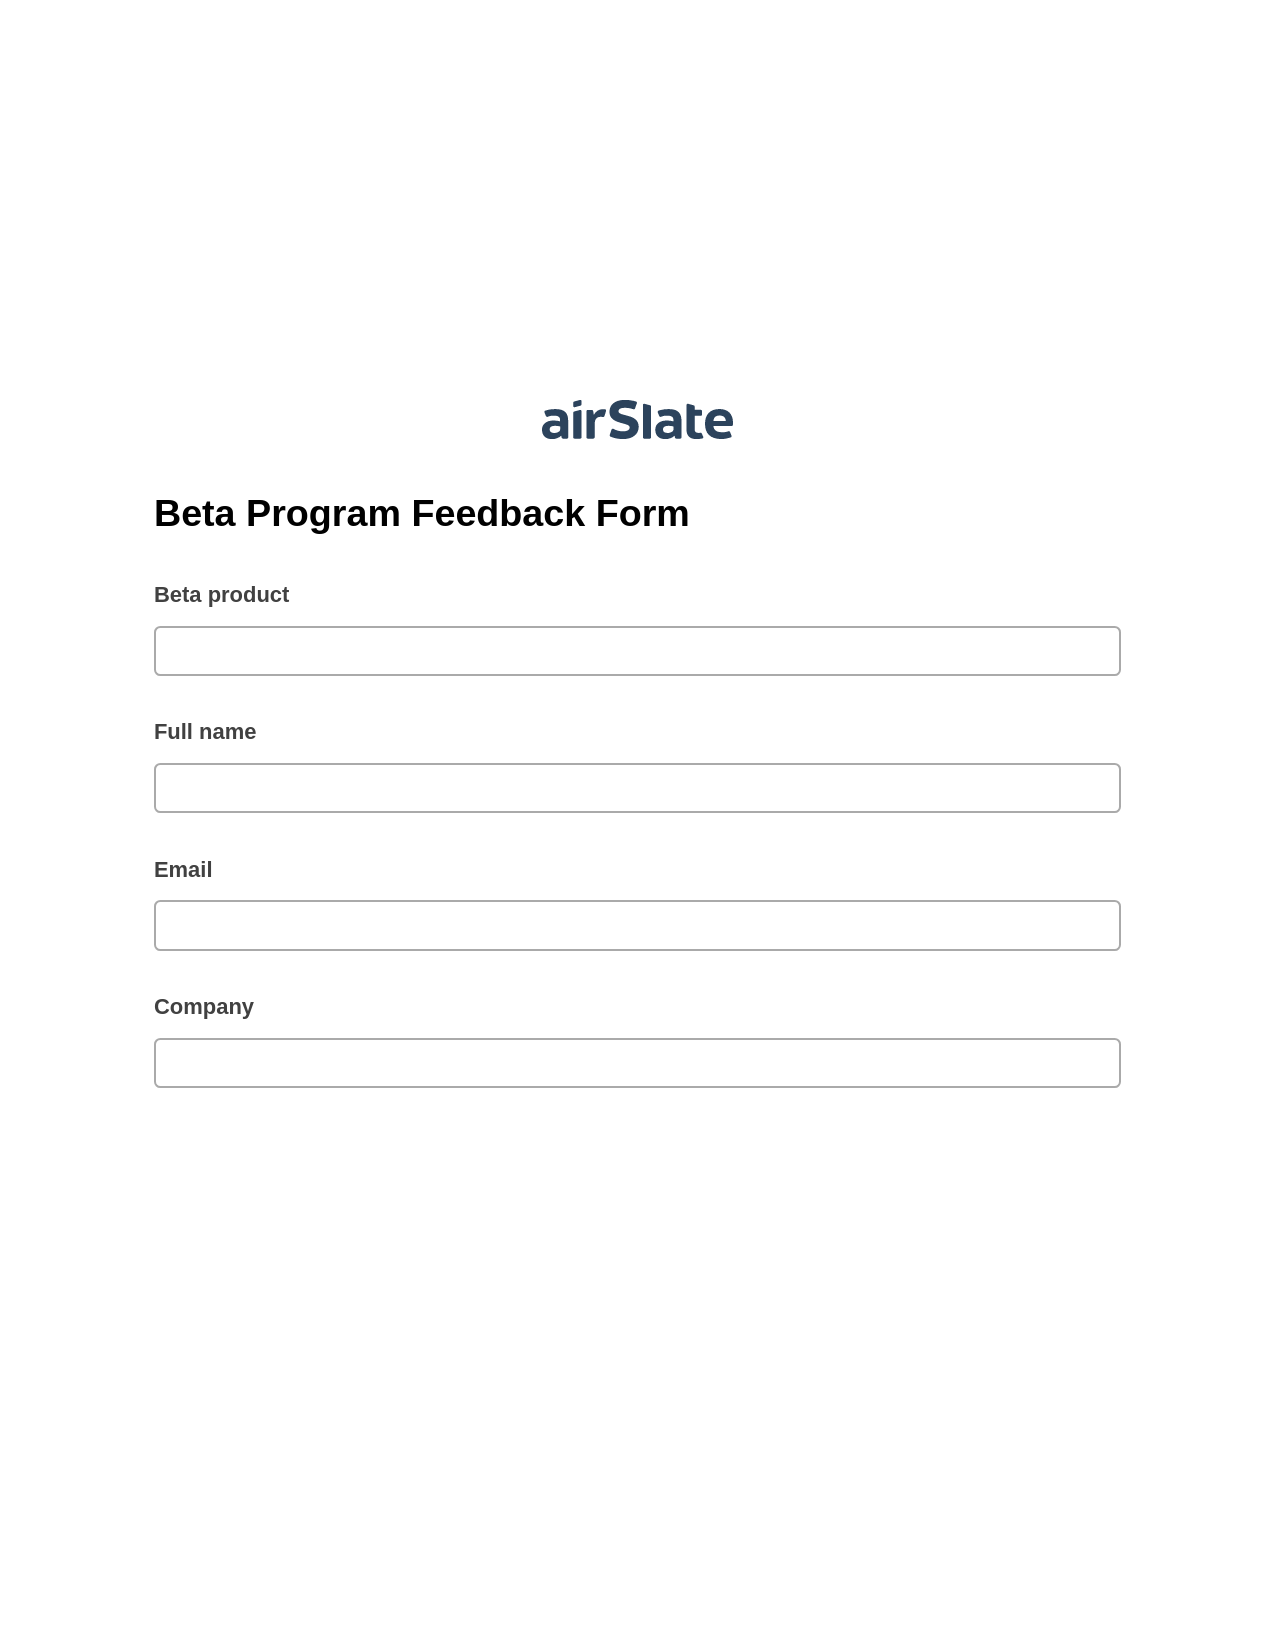 Multirole Beta Program Feedback Form Pre-fill from Google Sheets Bot, System Bot - Create a Slate in another Flow, Box Bot